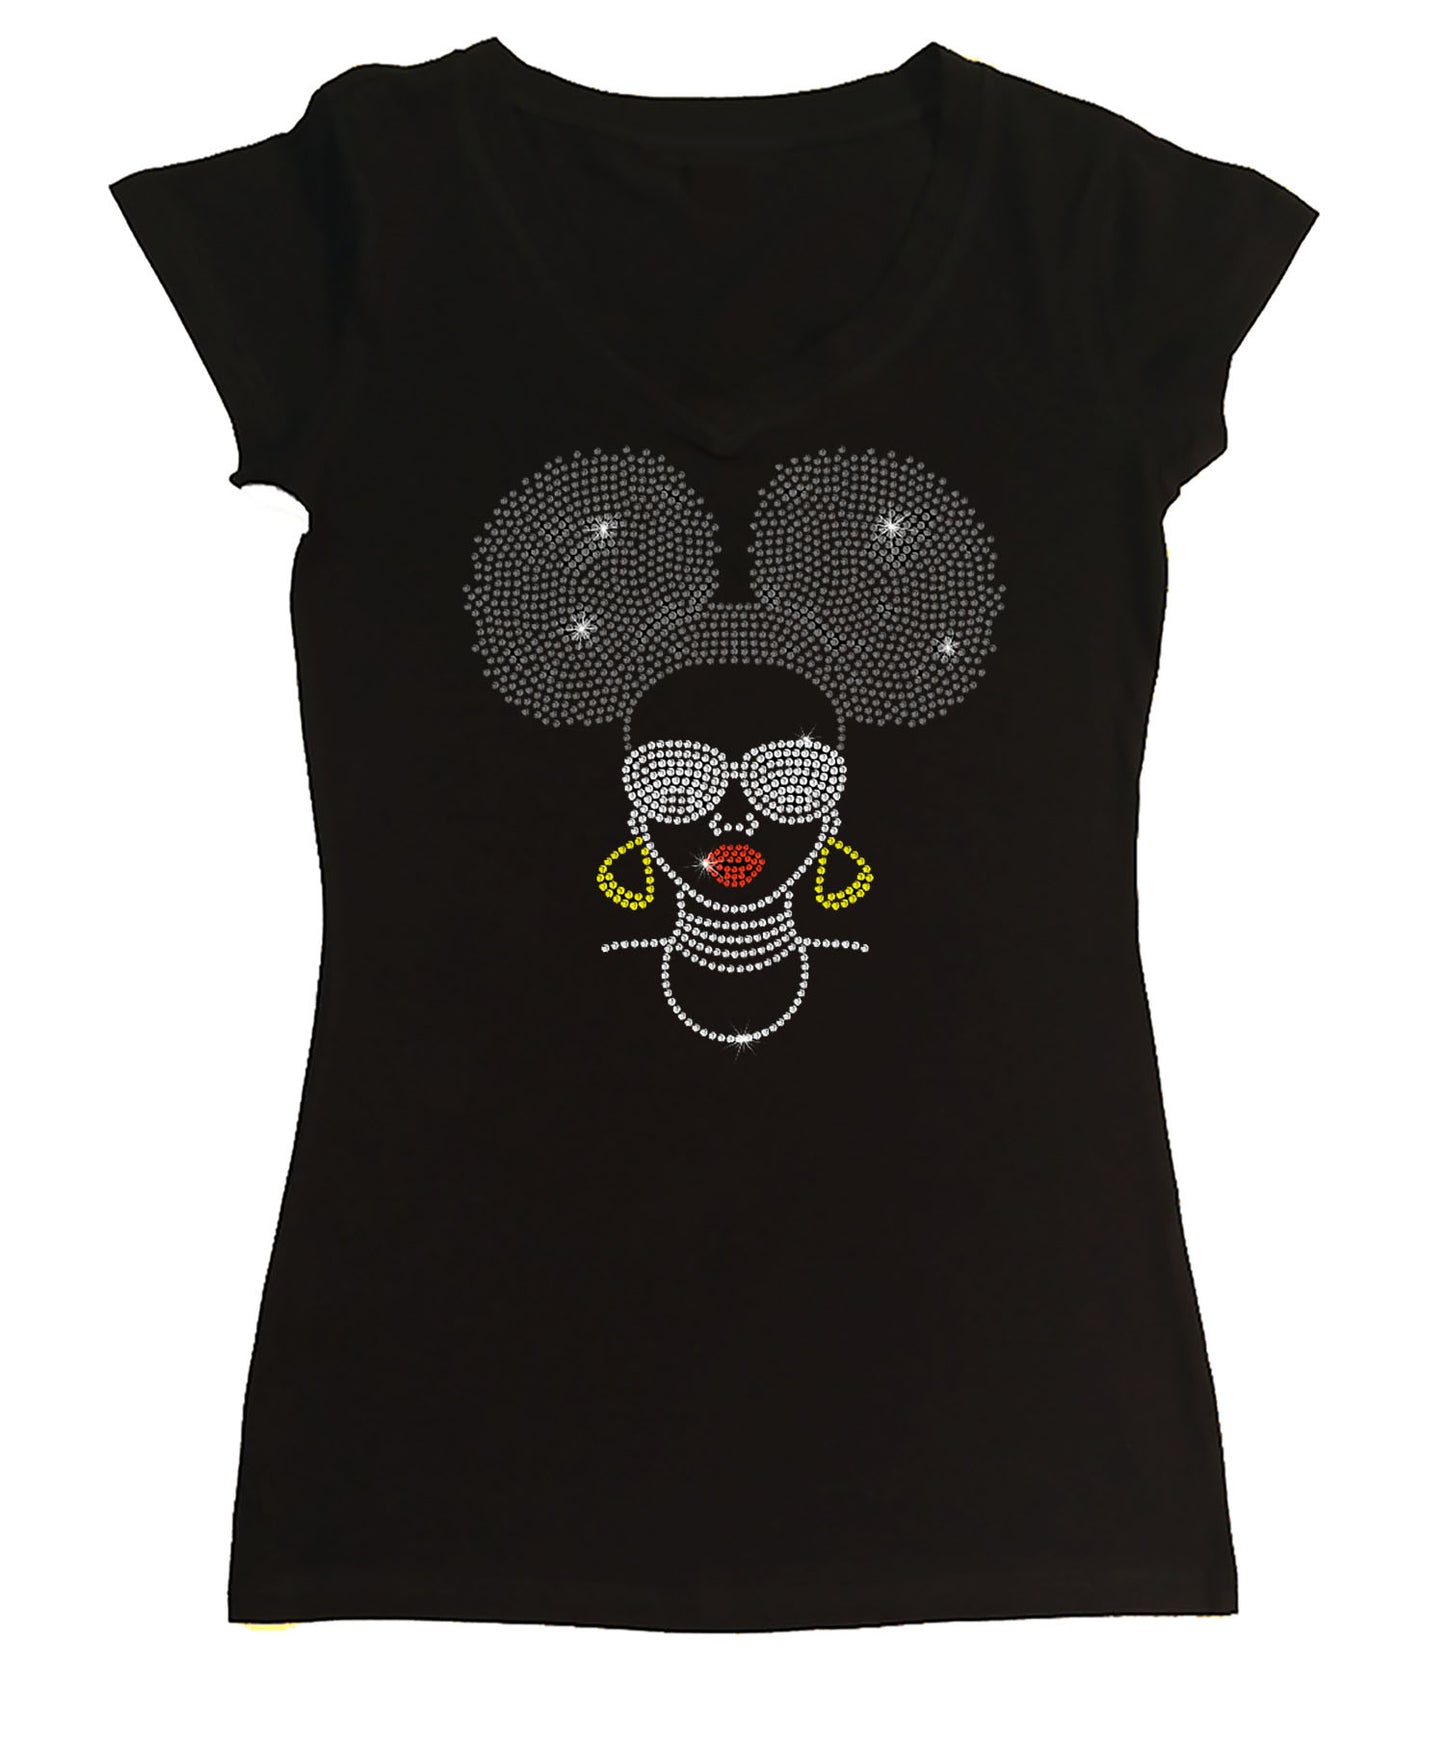 Womens T-shirt with Afro Puff Girl with Glasses in Rhinestones